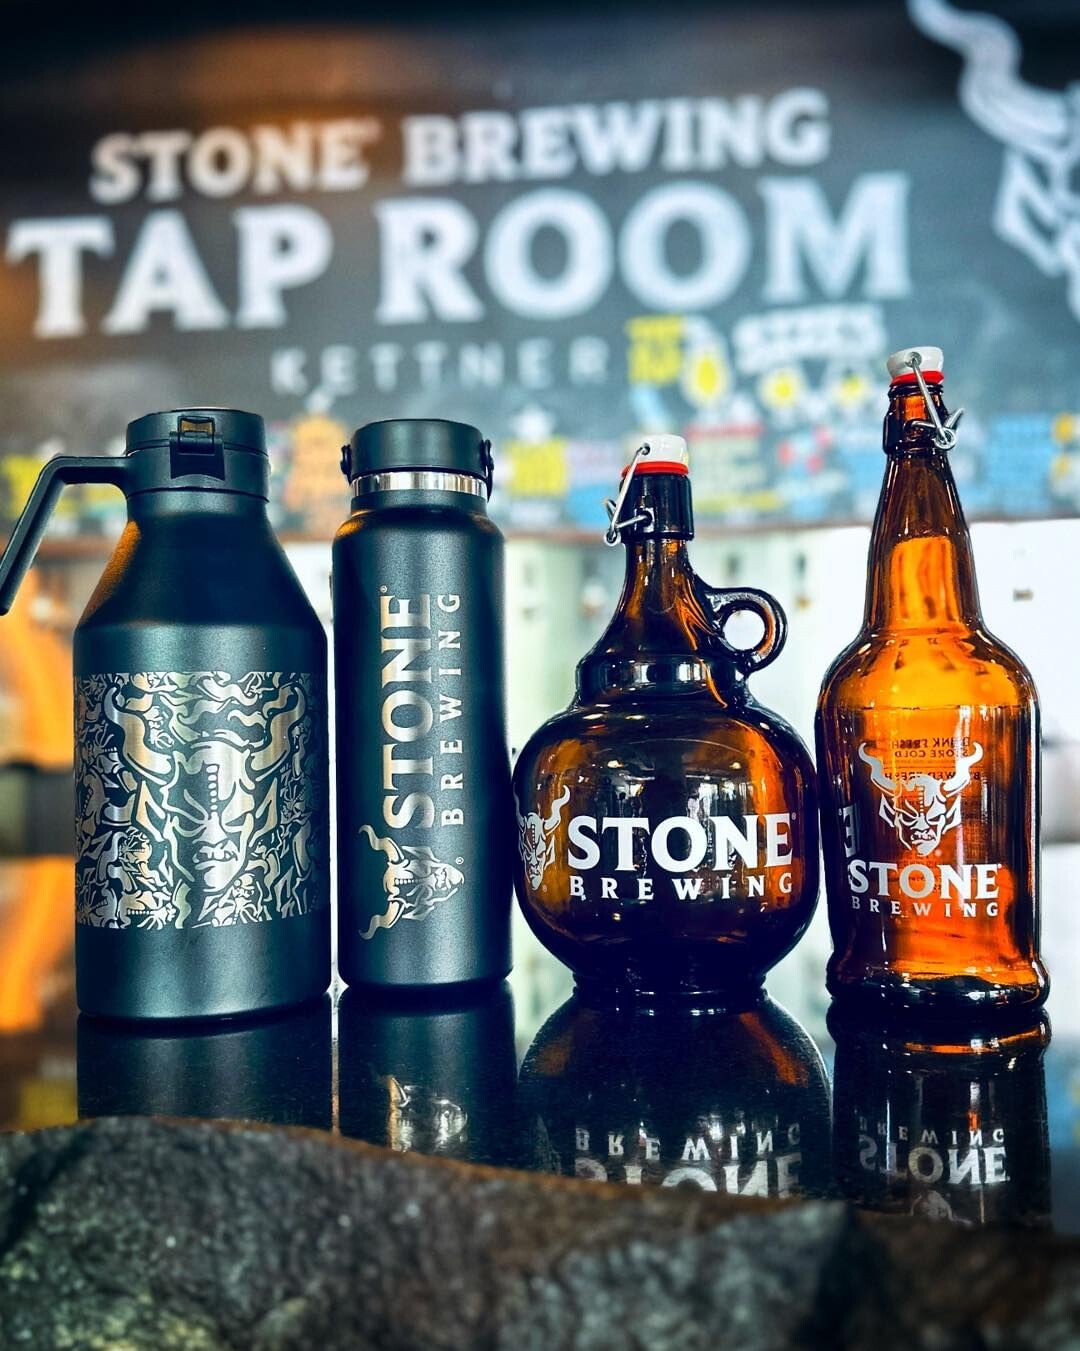 growlers on the bar at stone brewing tap room kettner in downtown little italy san diego